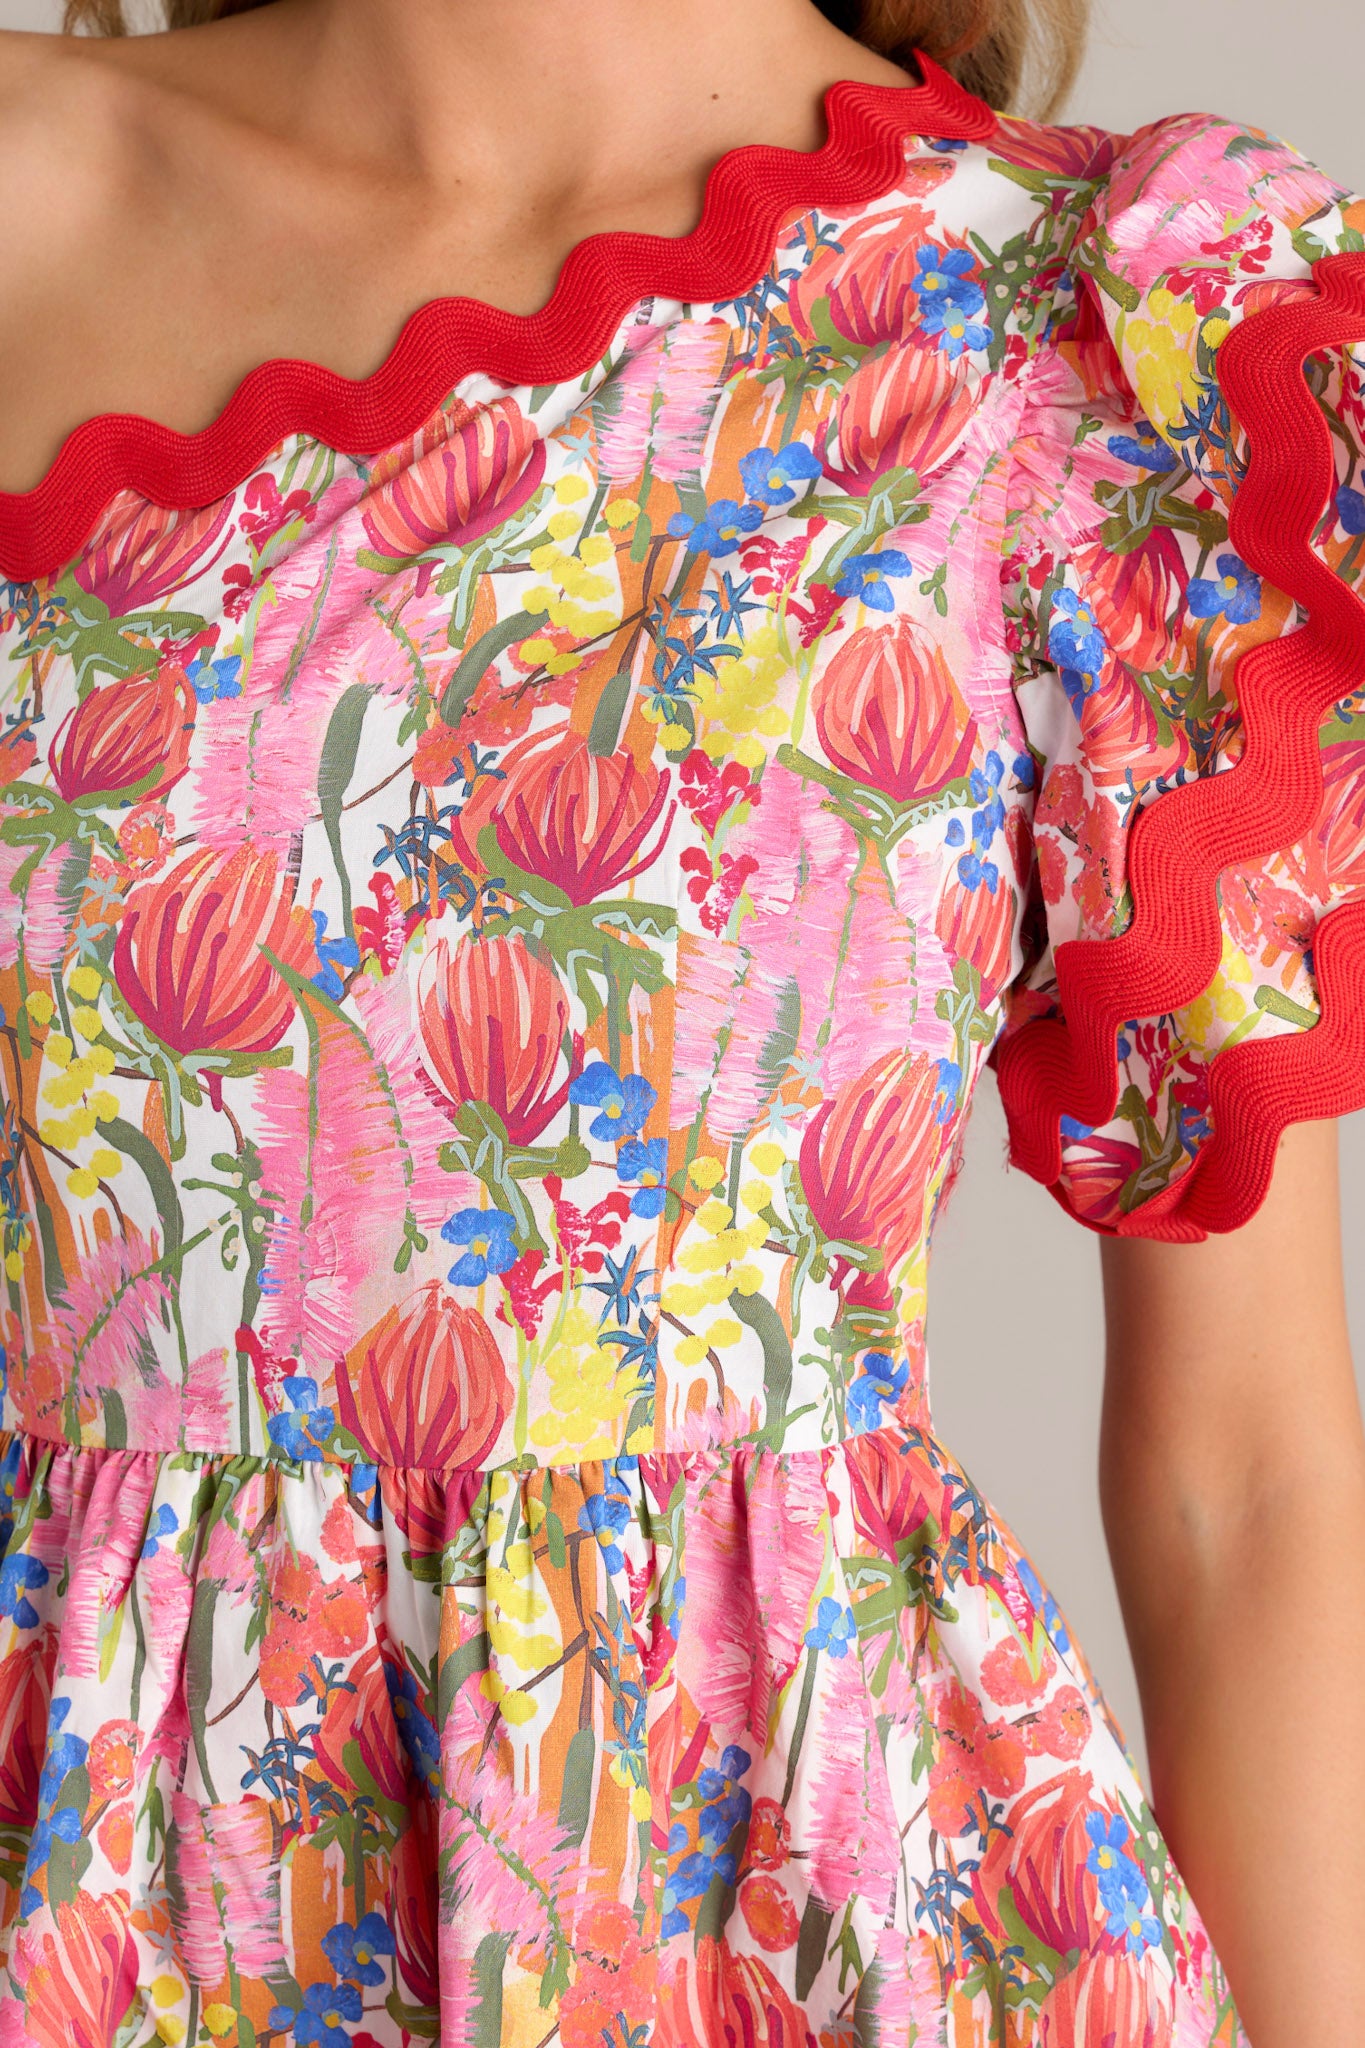 Close-up of the red multi floral romper fabric, highlighting the bold floral print and the intricate ricrac detailing.